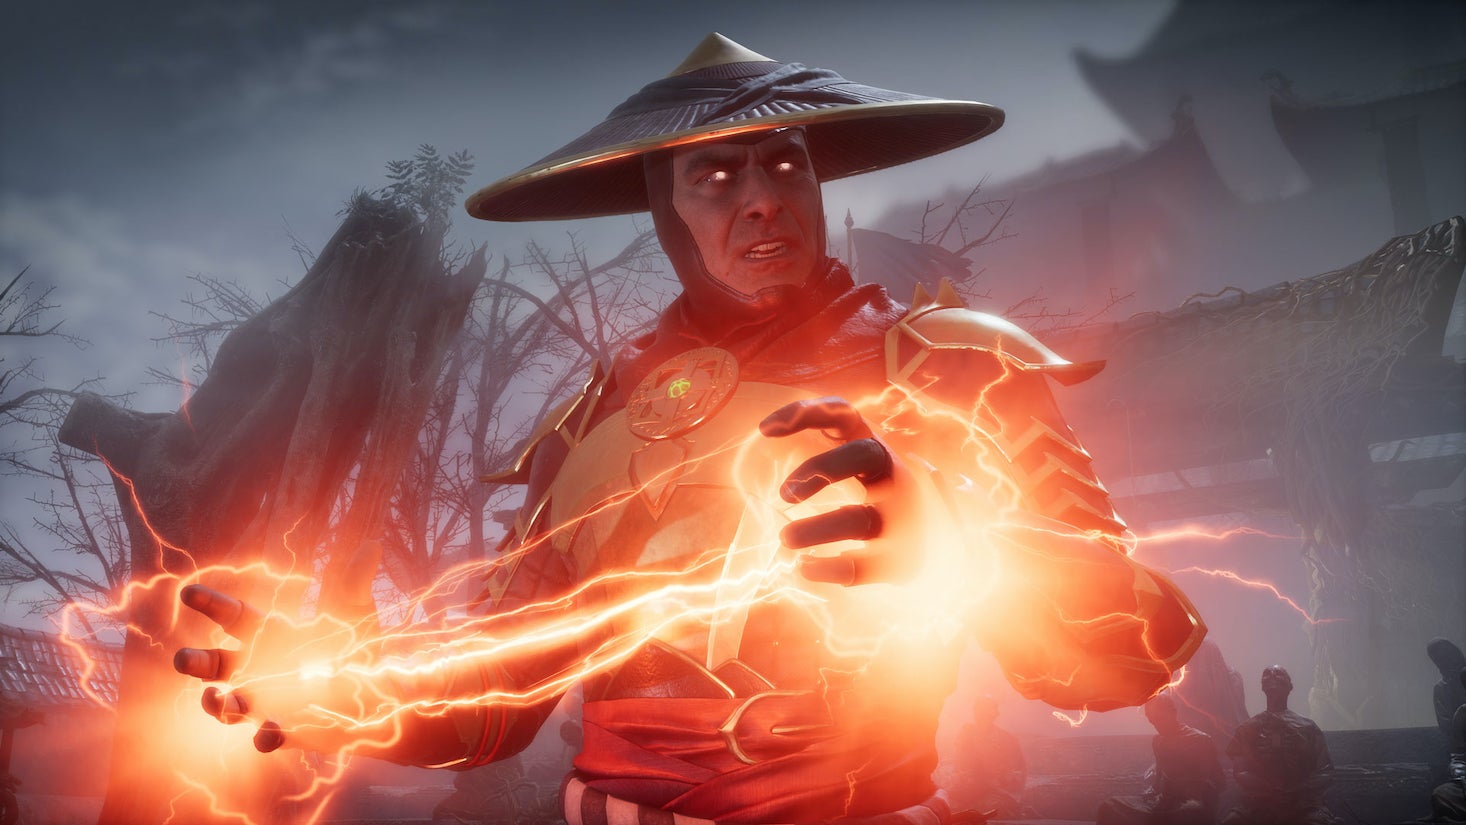 Raiden gets ready for a fight in Mortal Kombat 11